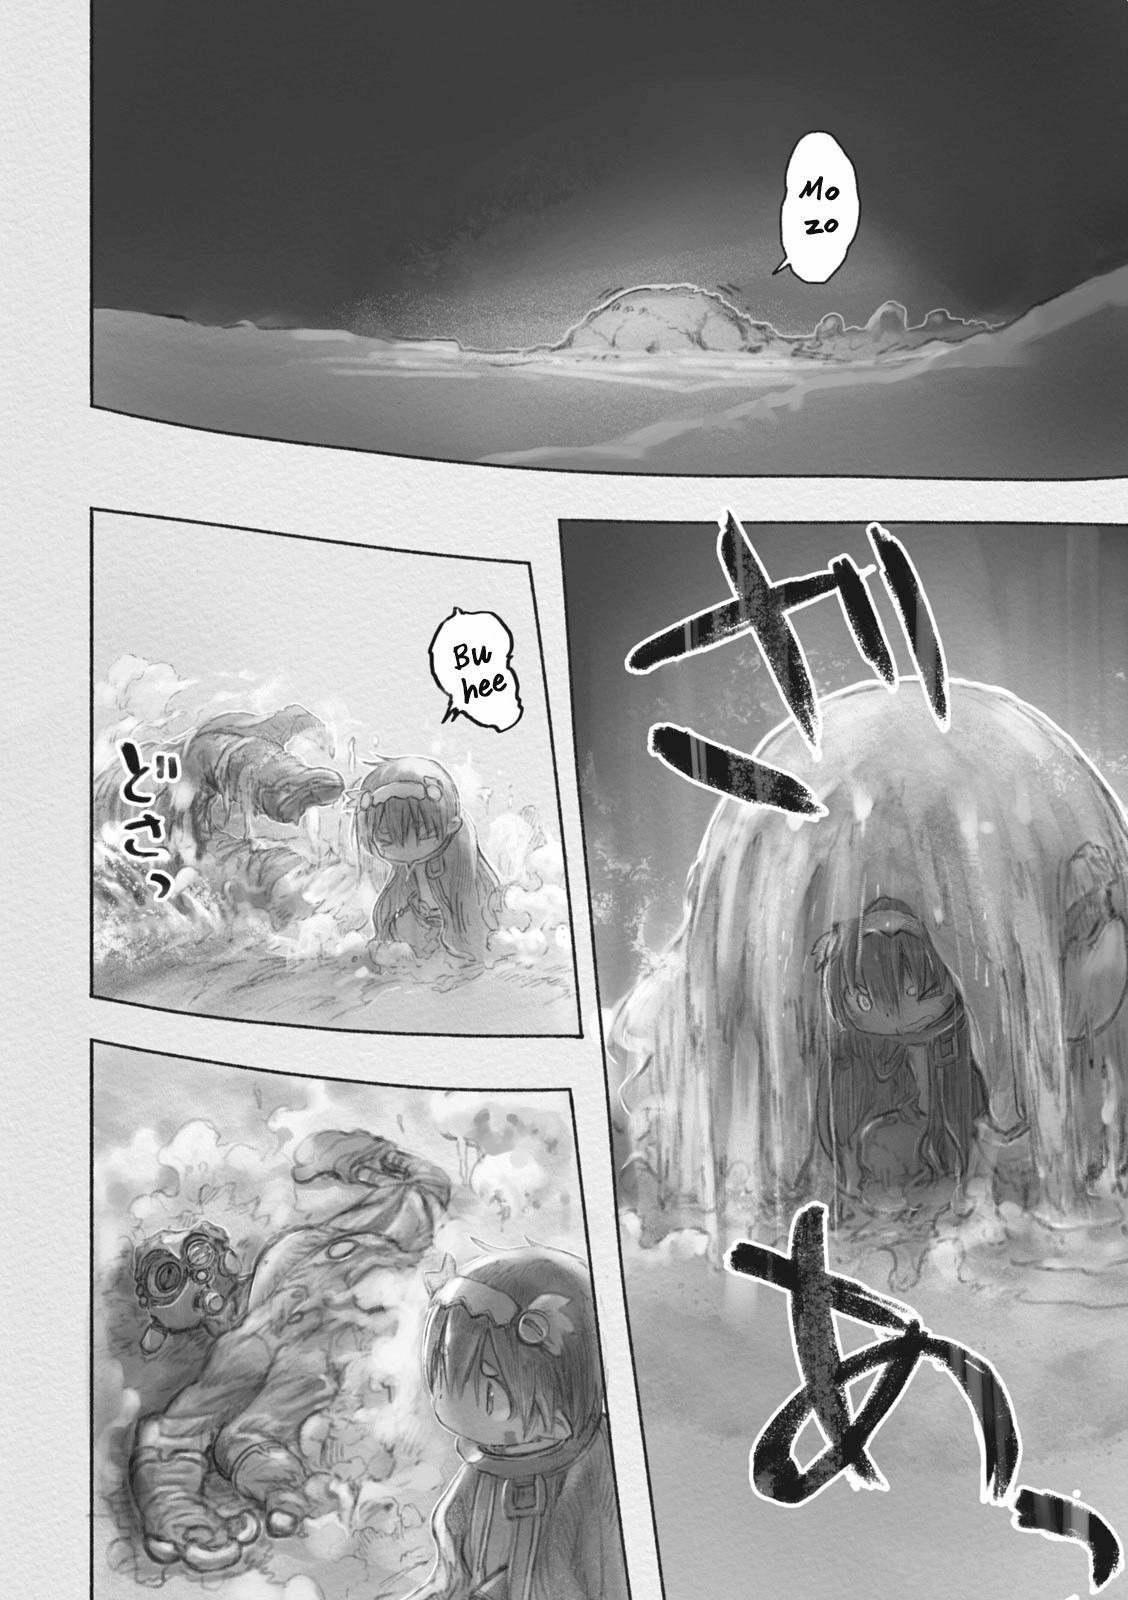 Made in Abyss, Chapter 60 - Golden - Made in Abyss Manga Online